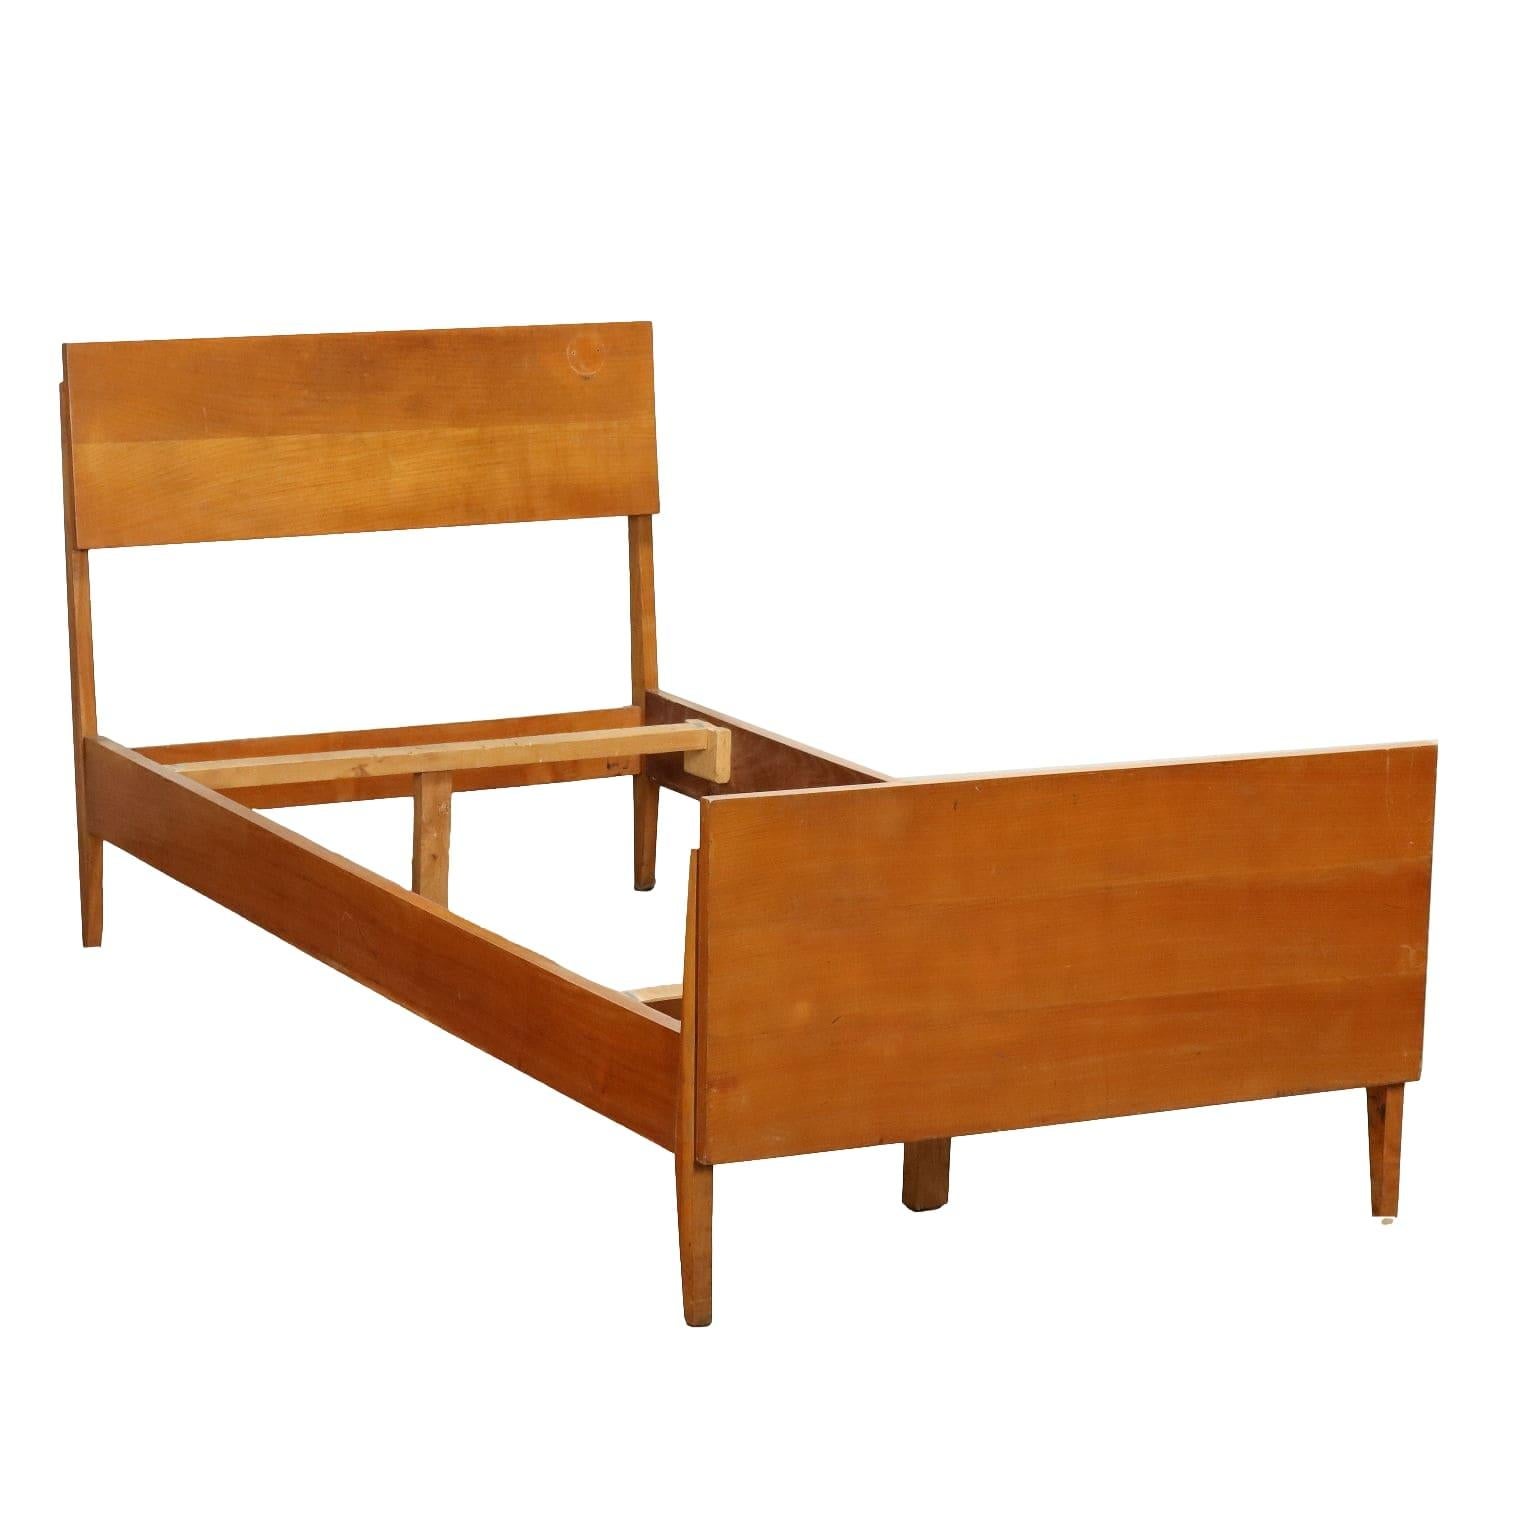 Single bed 1950s For Sale